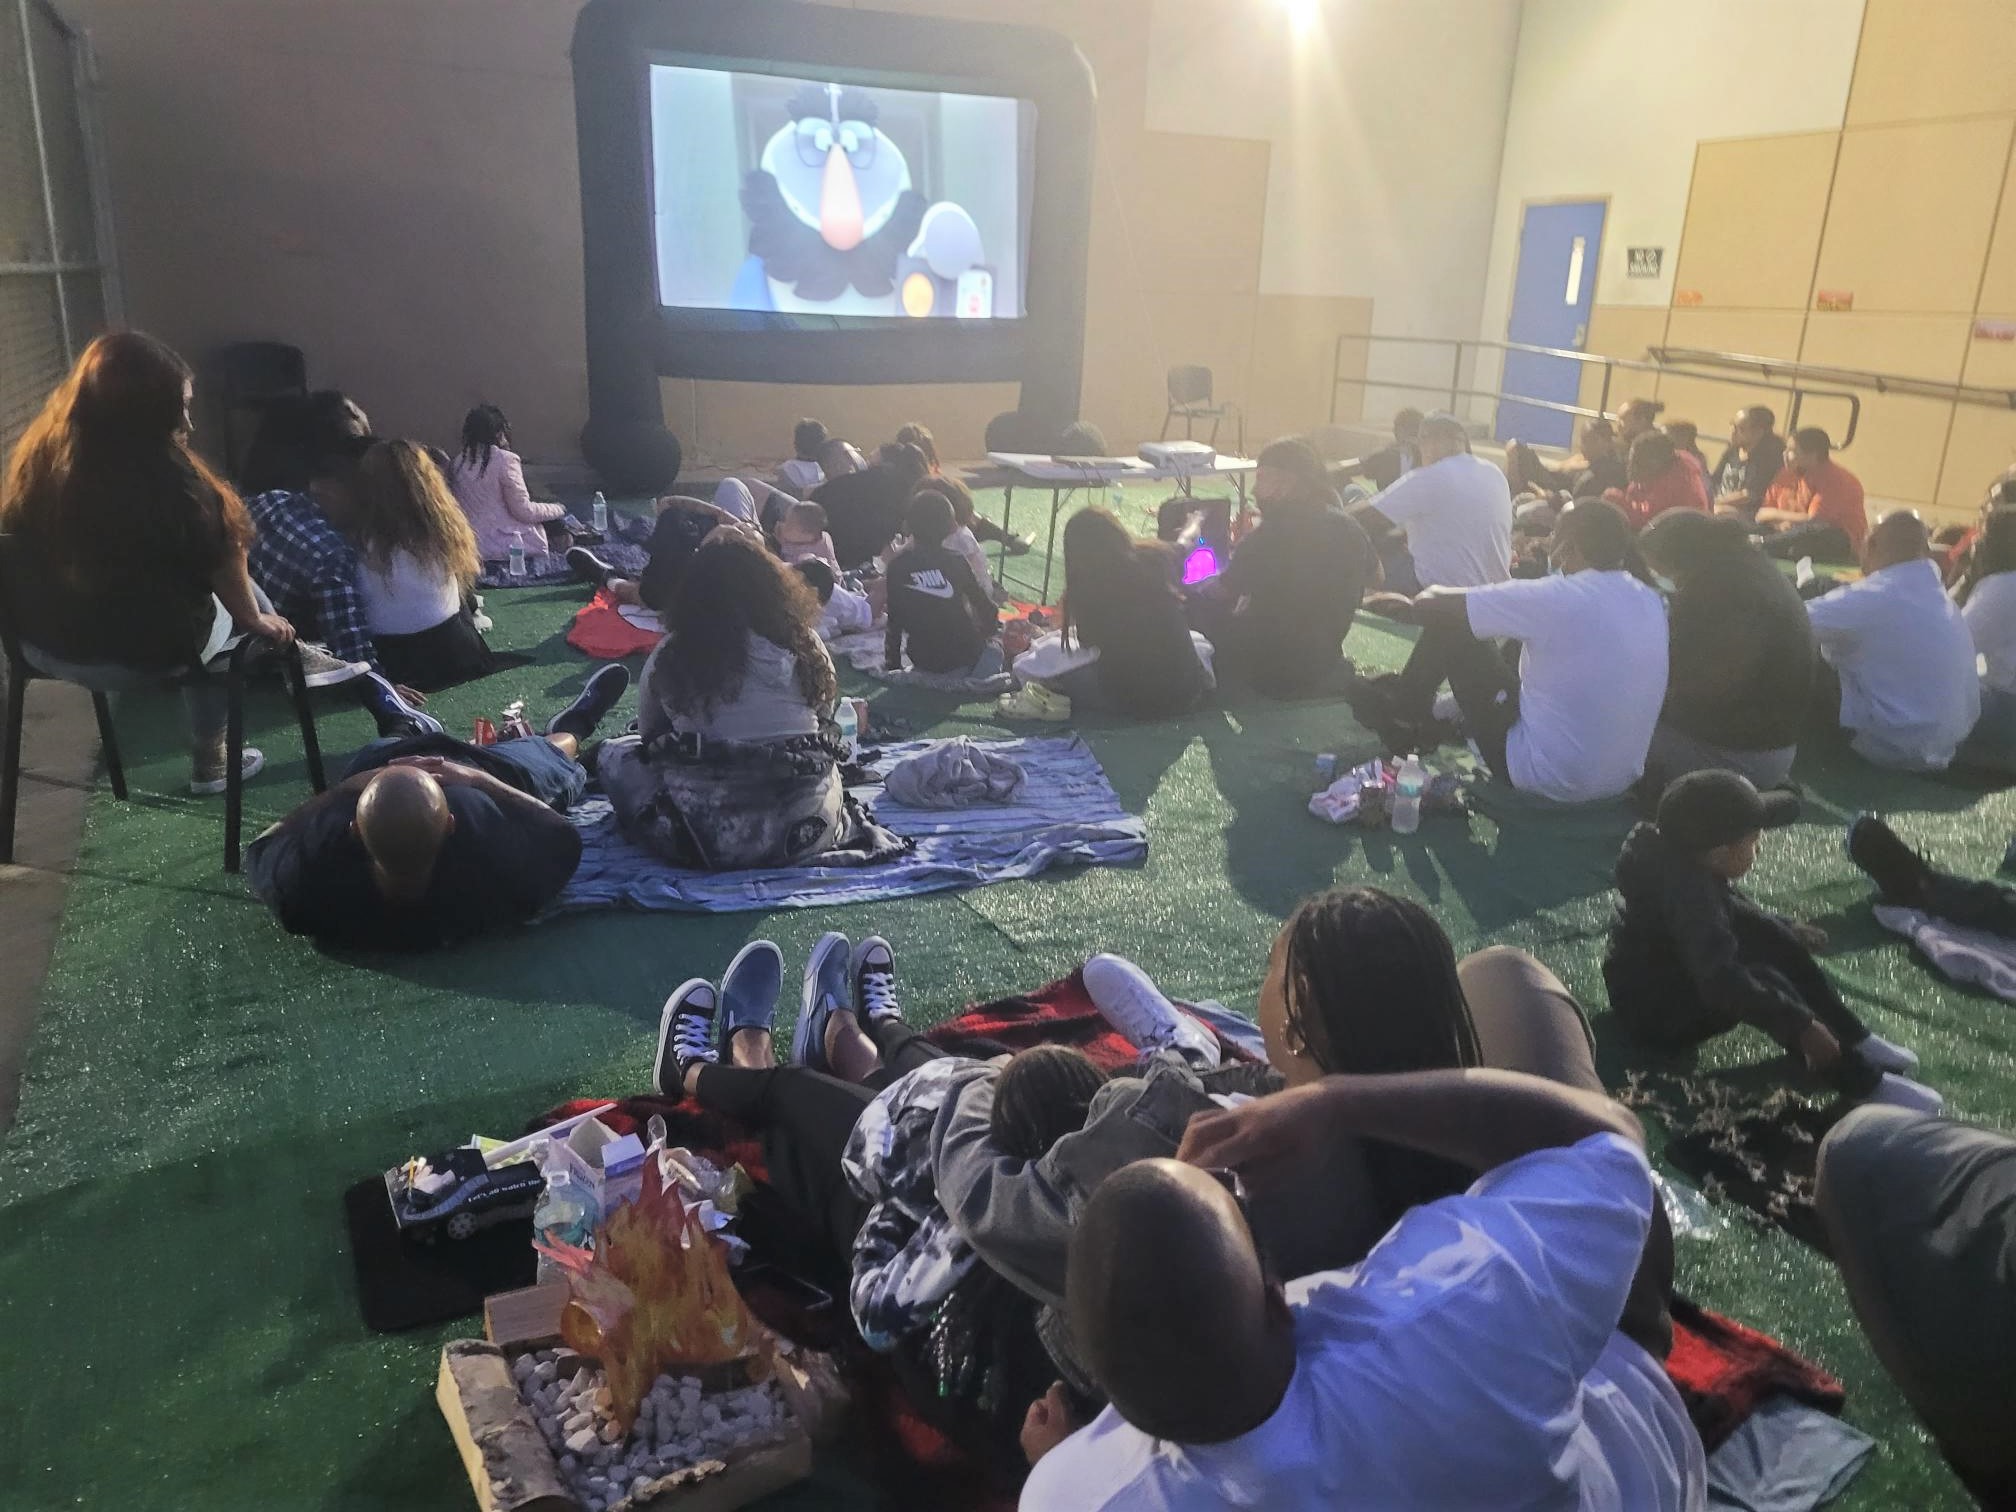 Children and their parents spread out on blankets with to watch a movie.